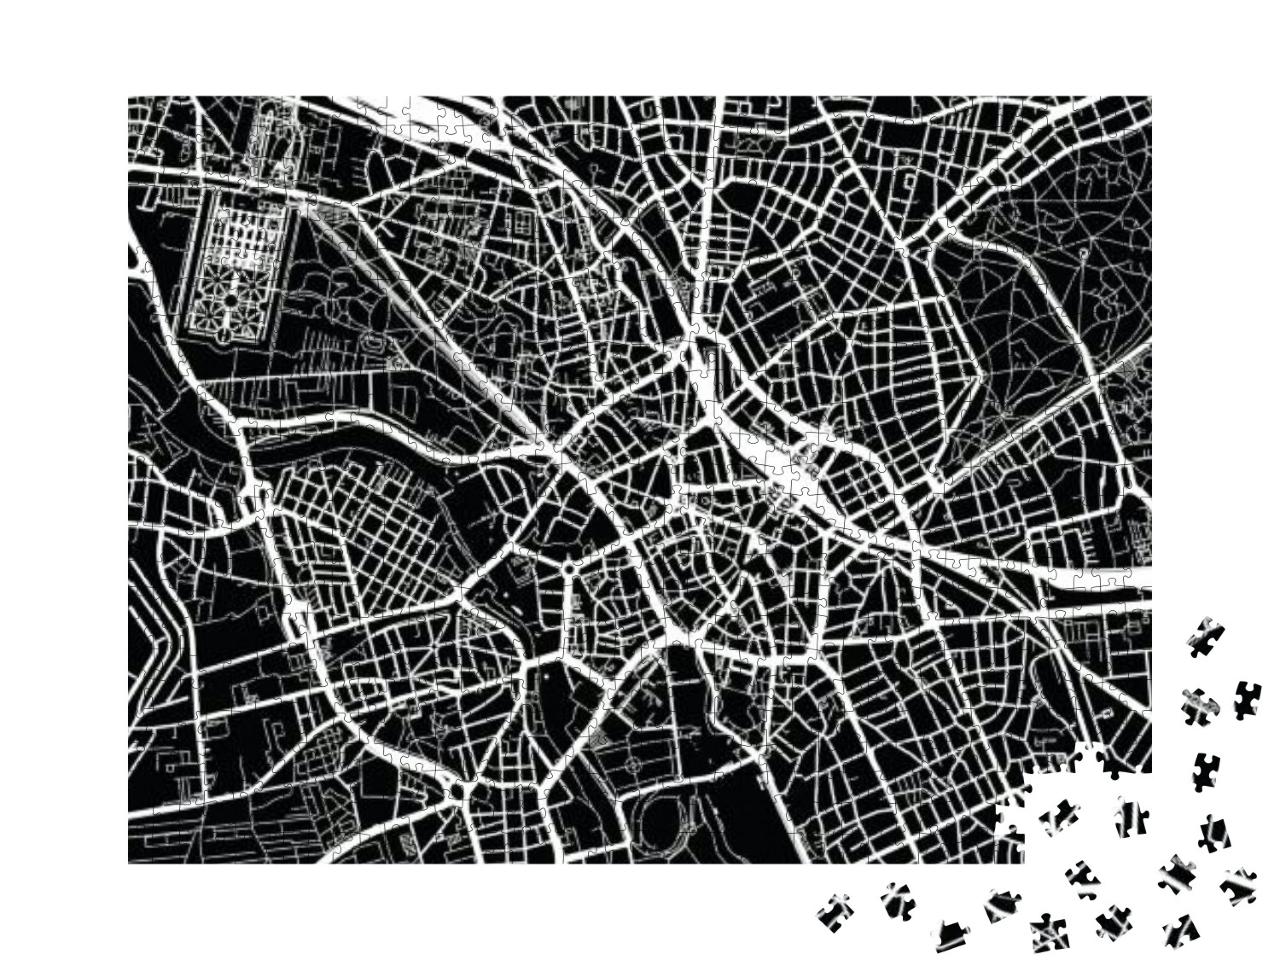 Urban Vector City Map of Hanover, Germany... Jigsaw Puzzle with 1000 pieces